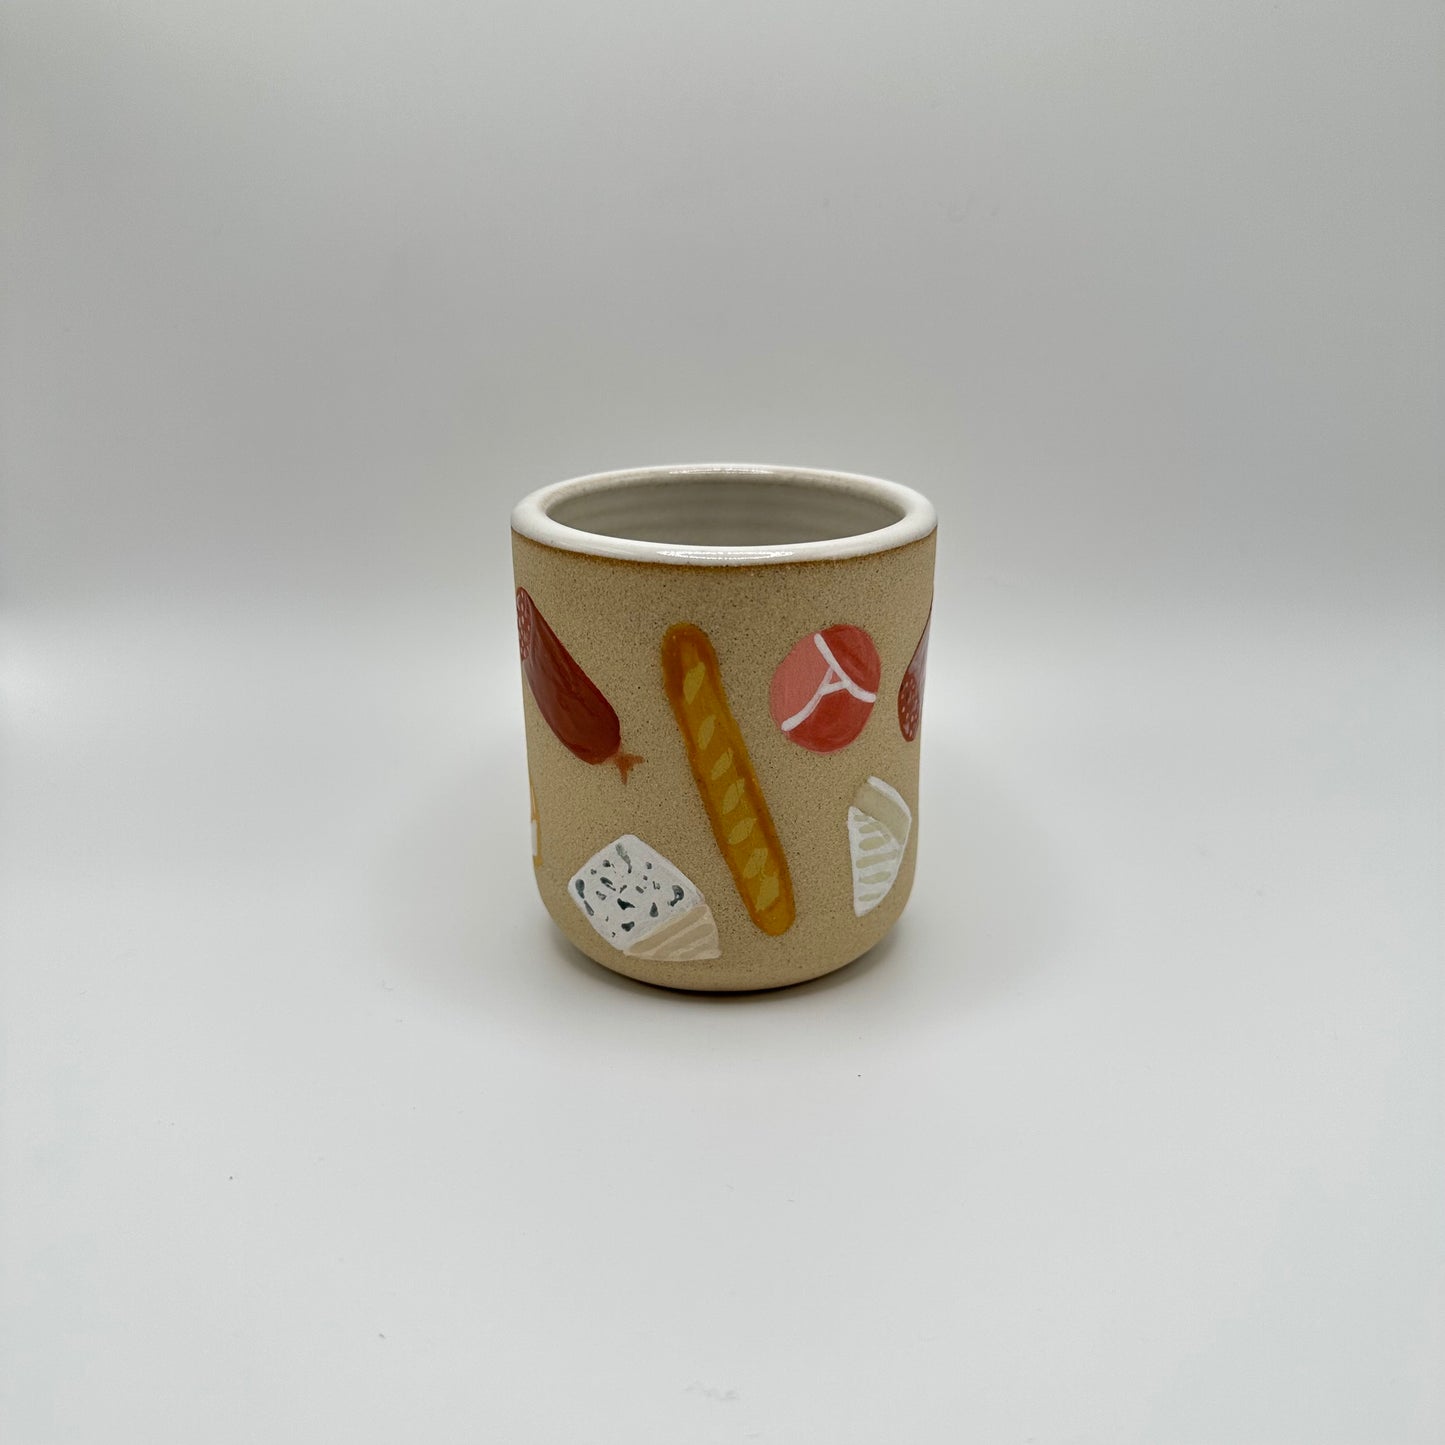 Cheese & Charcuterie Tumbler has an assortment of cheeses, meats and baguettes in various shapes, sizes and cuts.